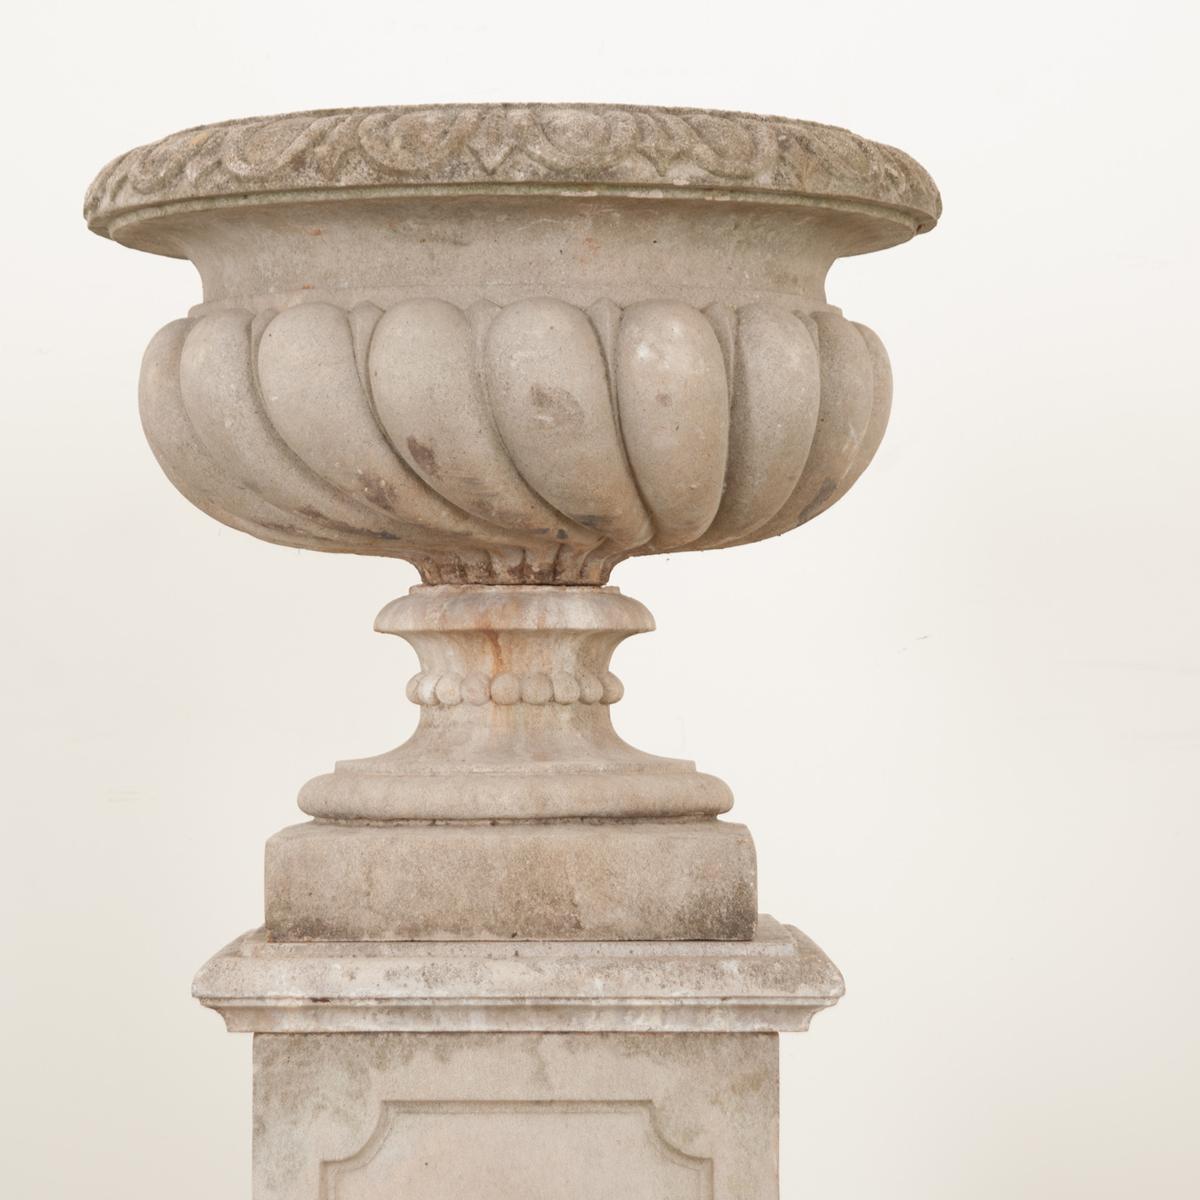 This large garden urn-on-pedestal is a smart way to elevate your outdoor space to the next level of sophistication. The stone garden urn breaks down into 5 pieces. The bowl, pedestal, square cap on top of the pedestal, rectangular pedestal and the